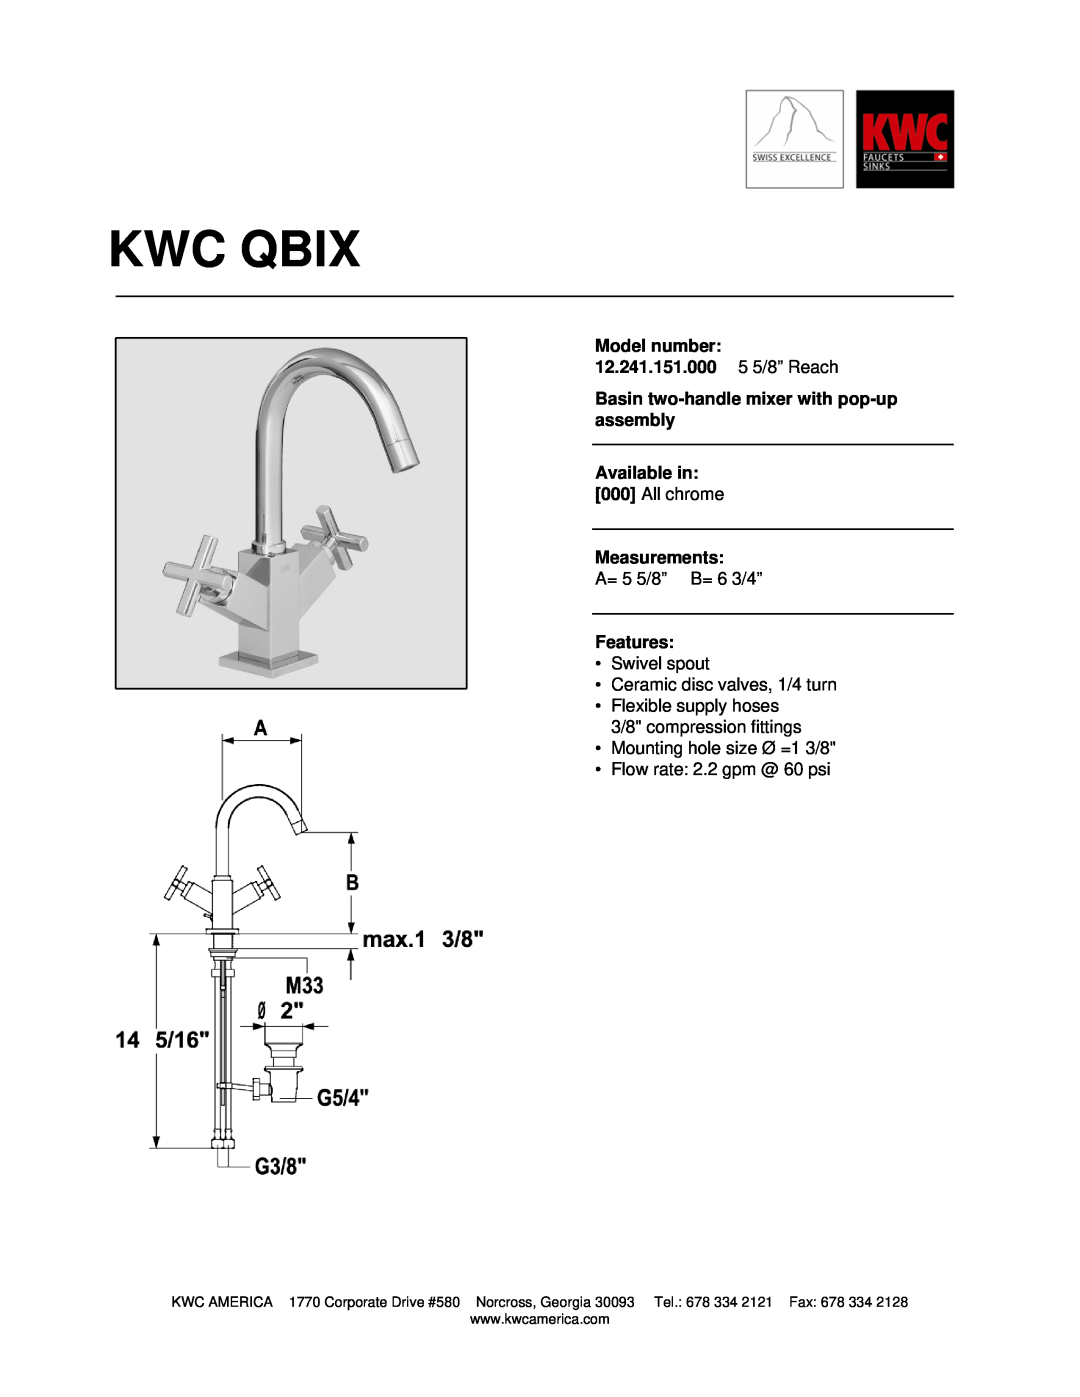 KWC manual Kwc Qbix, Model number 12.241.151.000 5 5/8” Reach, Basin two-handlemixer with pop-upassembly, Available in 